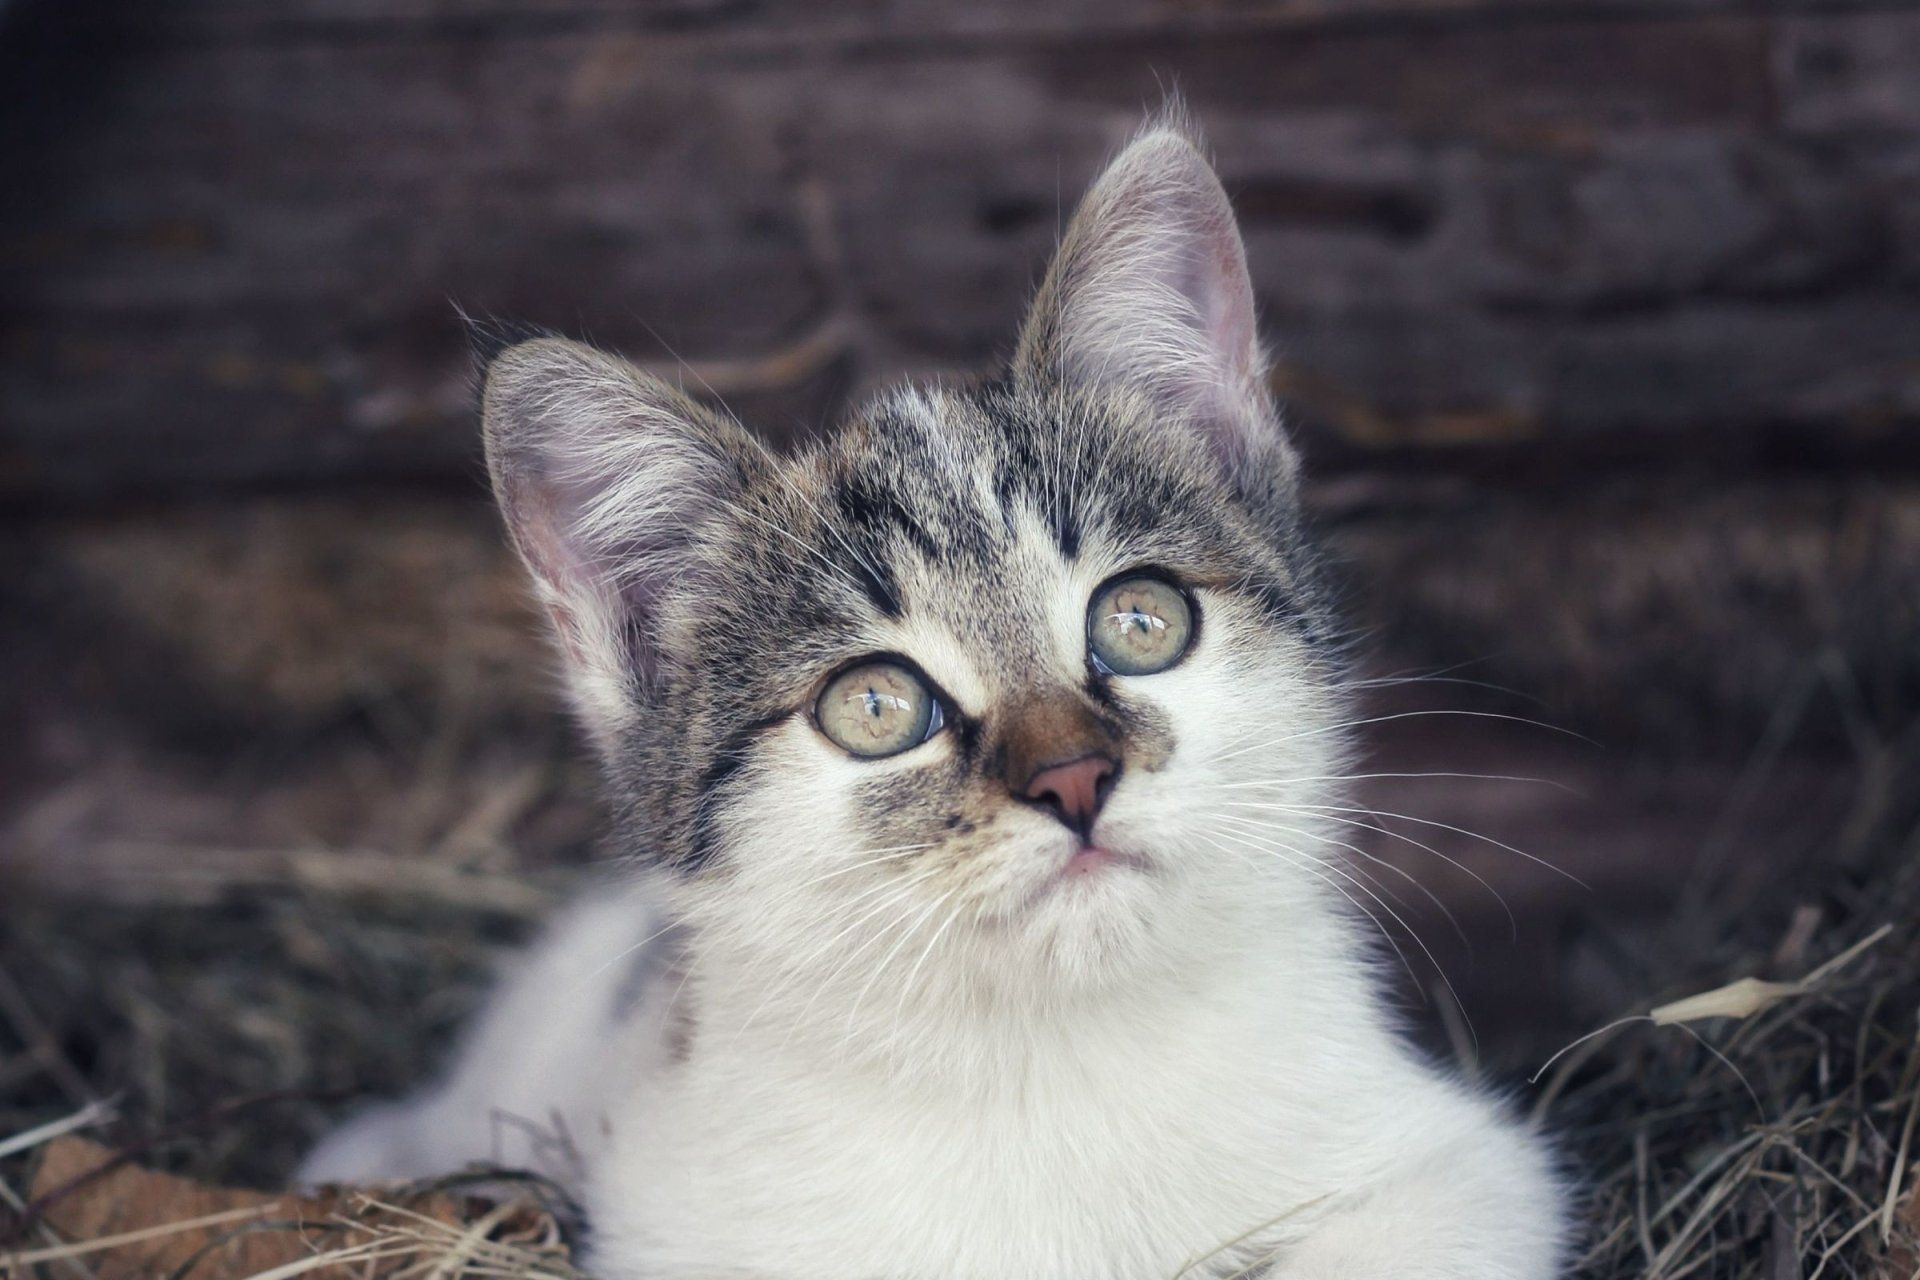 a gray and white kitten with green eyes looks up at the camera